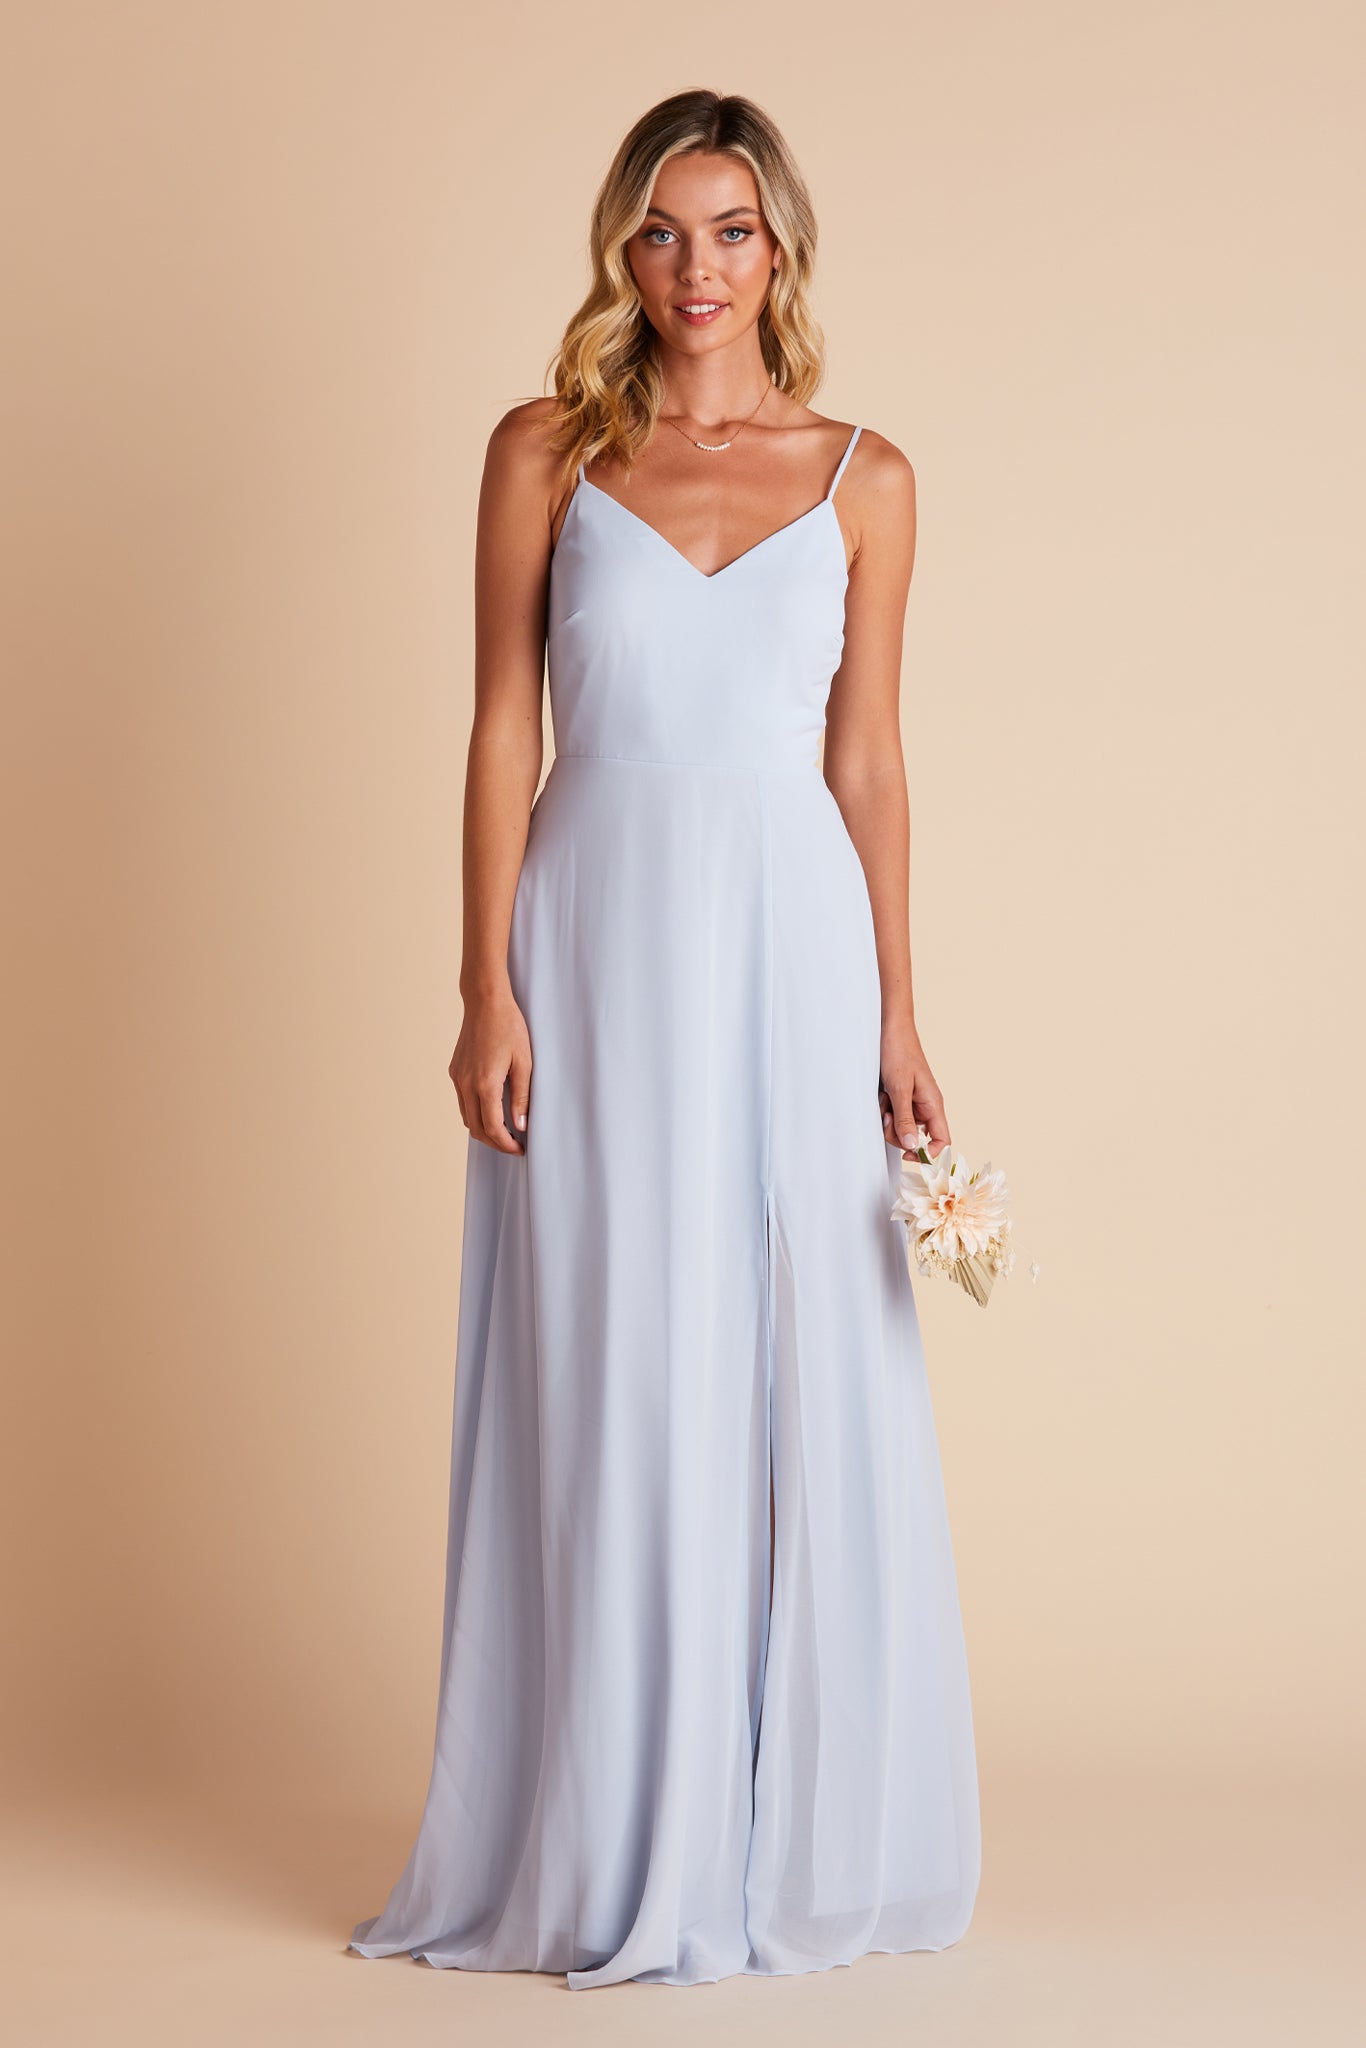 Devin convertible bridesmaid dress in ice blue chiffon by Birdy Grey, front view